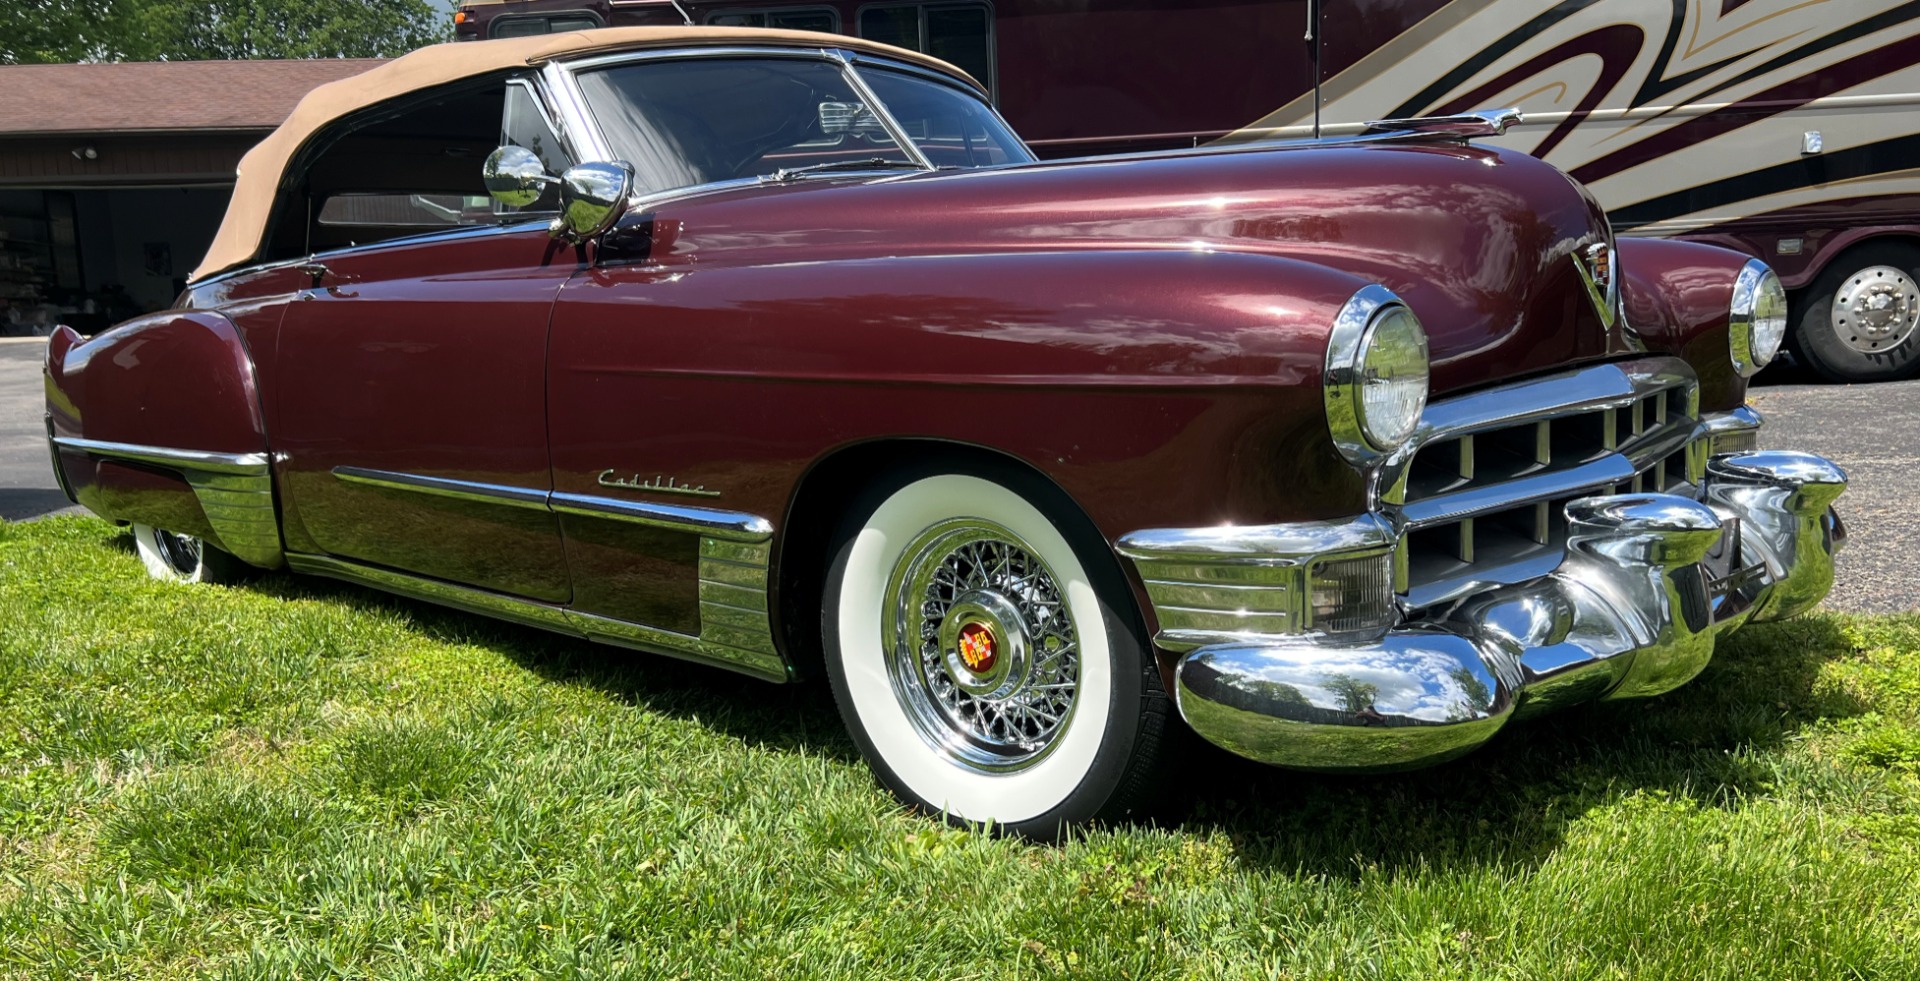 Used 1949 Cadillac Series 62 Convertible  238 , For Sale $67000, Call Us: (704) 996-3735